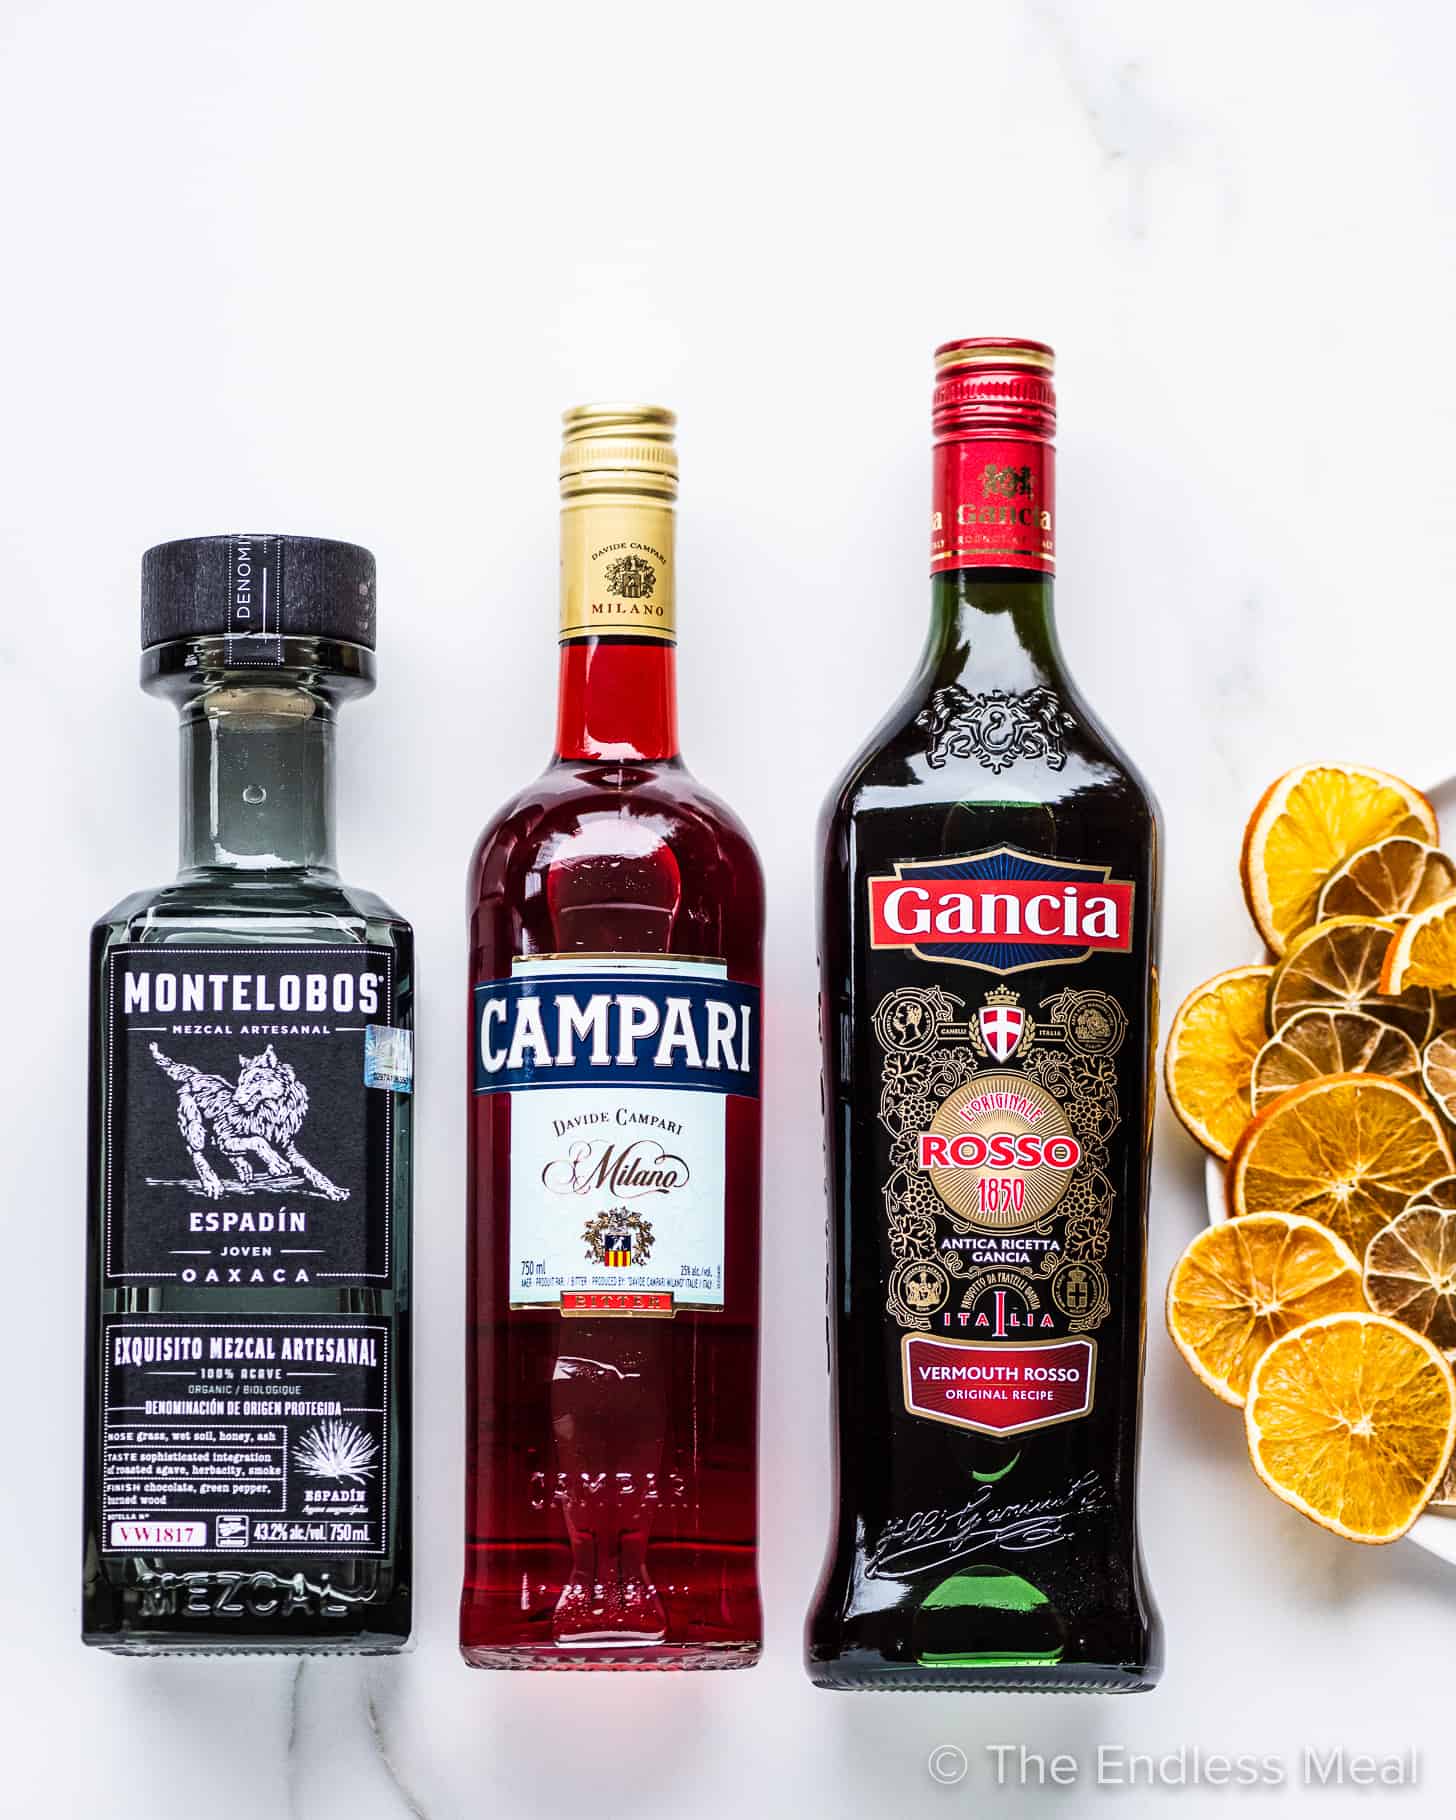 All the ingredients to make a perfect mezcal negroni.